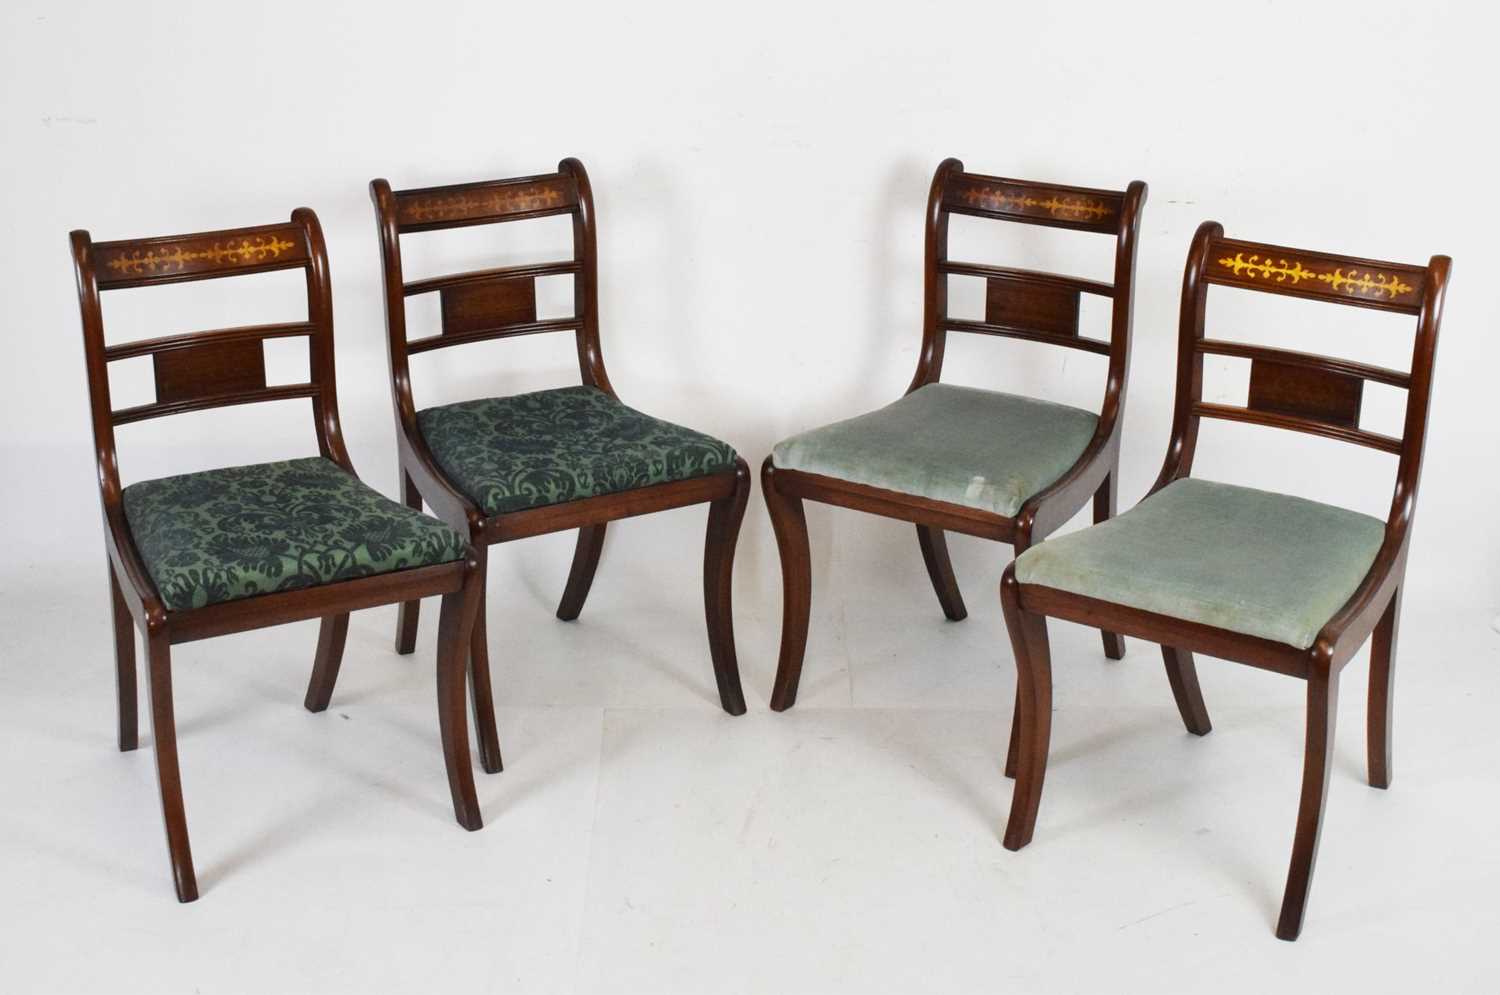 Set of four mahogany and brass inlaid chairs